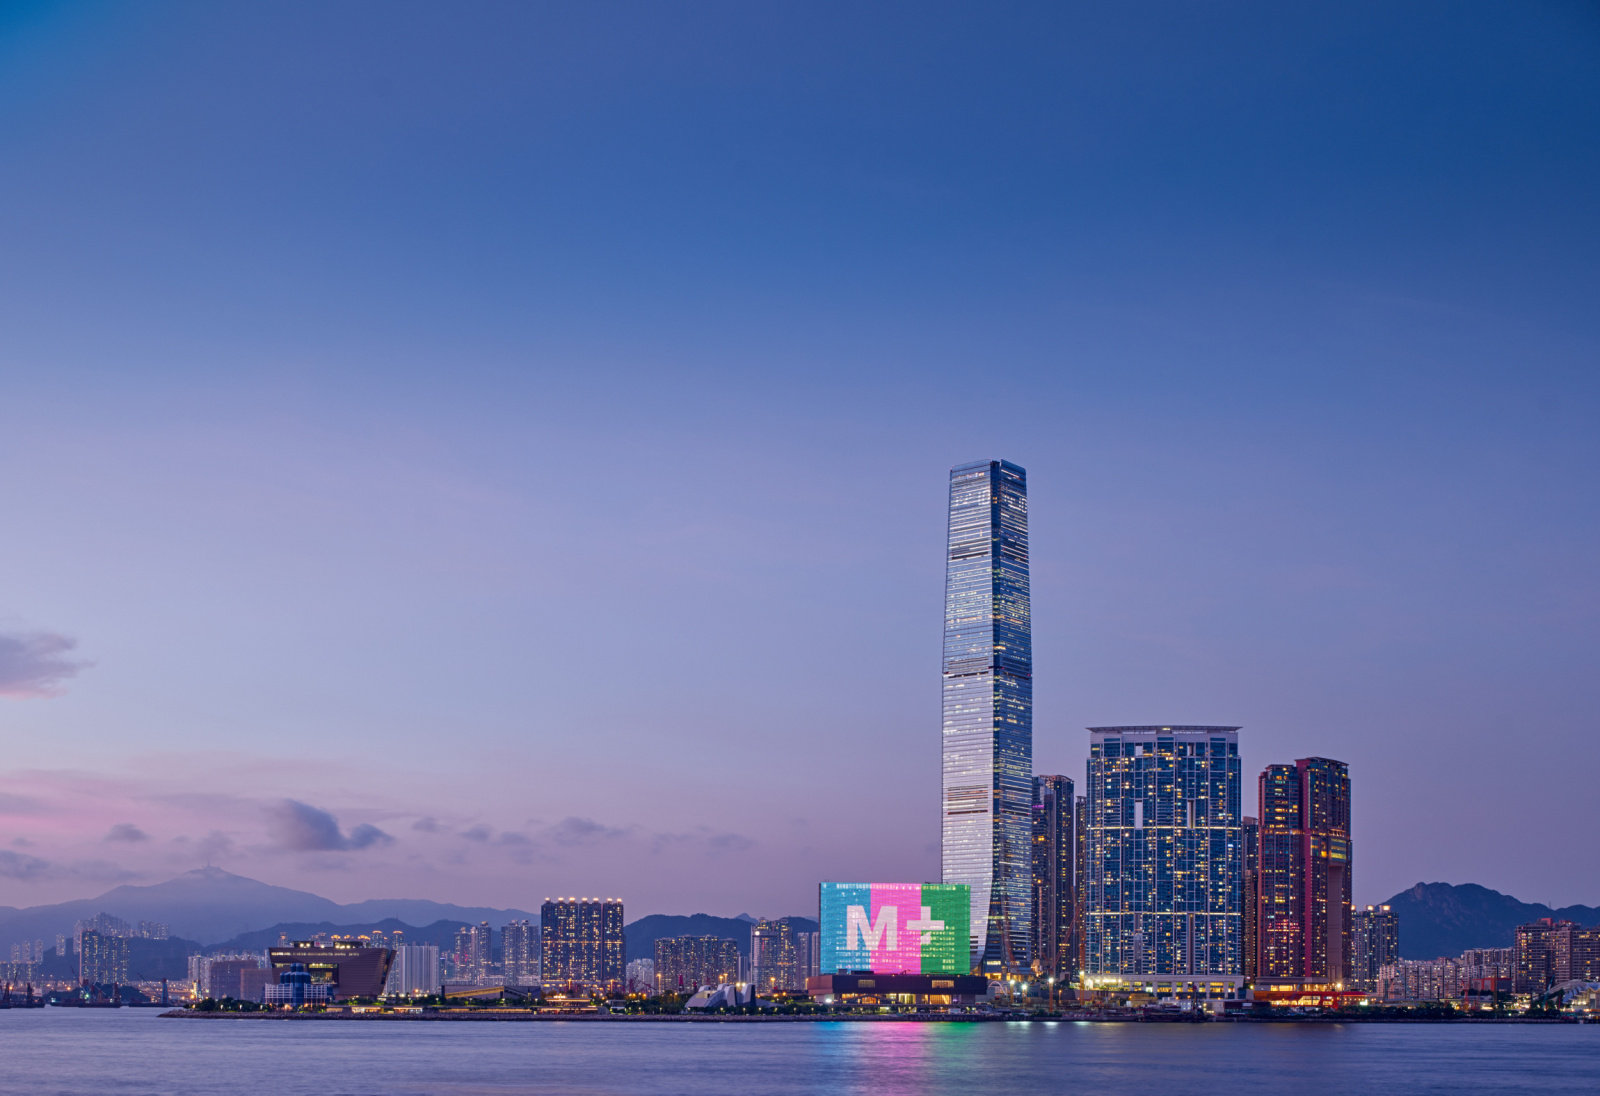 The M+ museum, part of the West Kowloon Cultural District, stands out thanks to its giant LED screen and together with the nearby Xiqu Centre is a world-class arts venue. Photo: WKCD